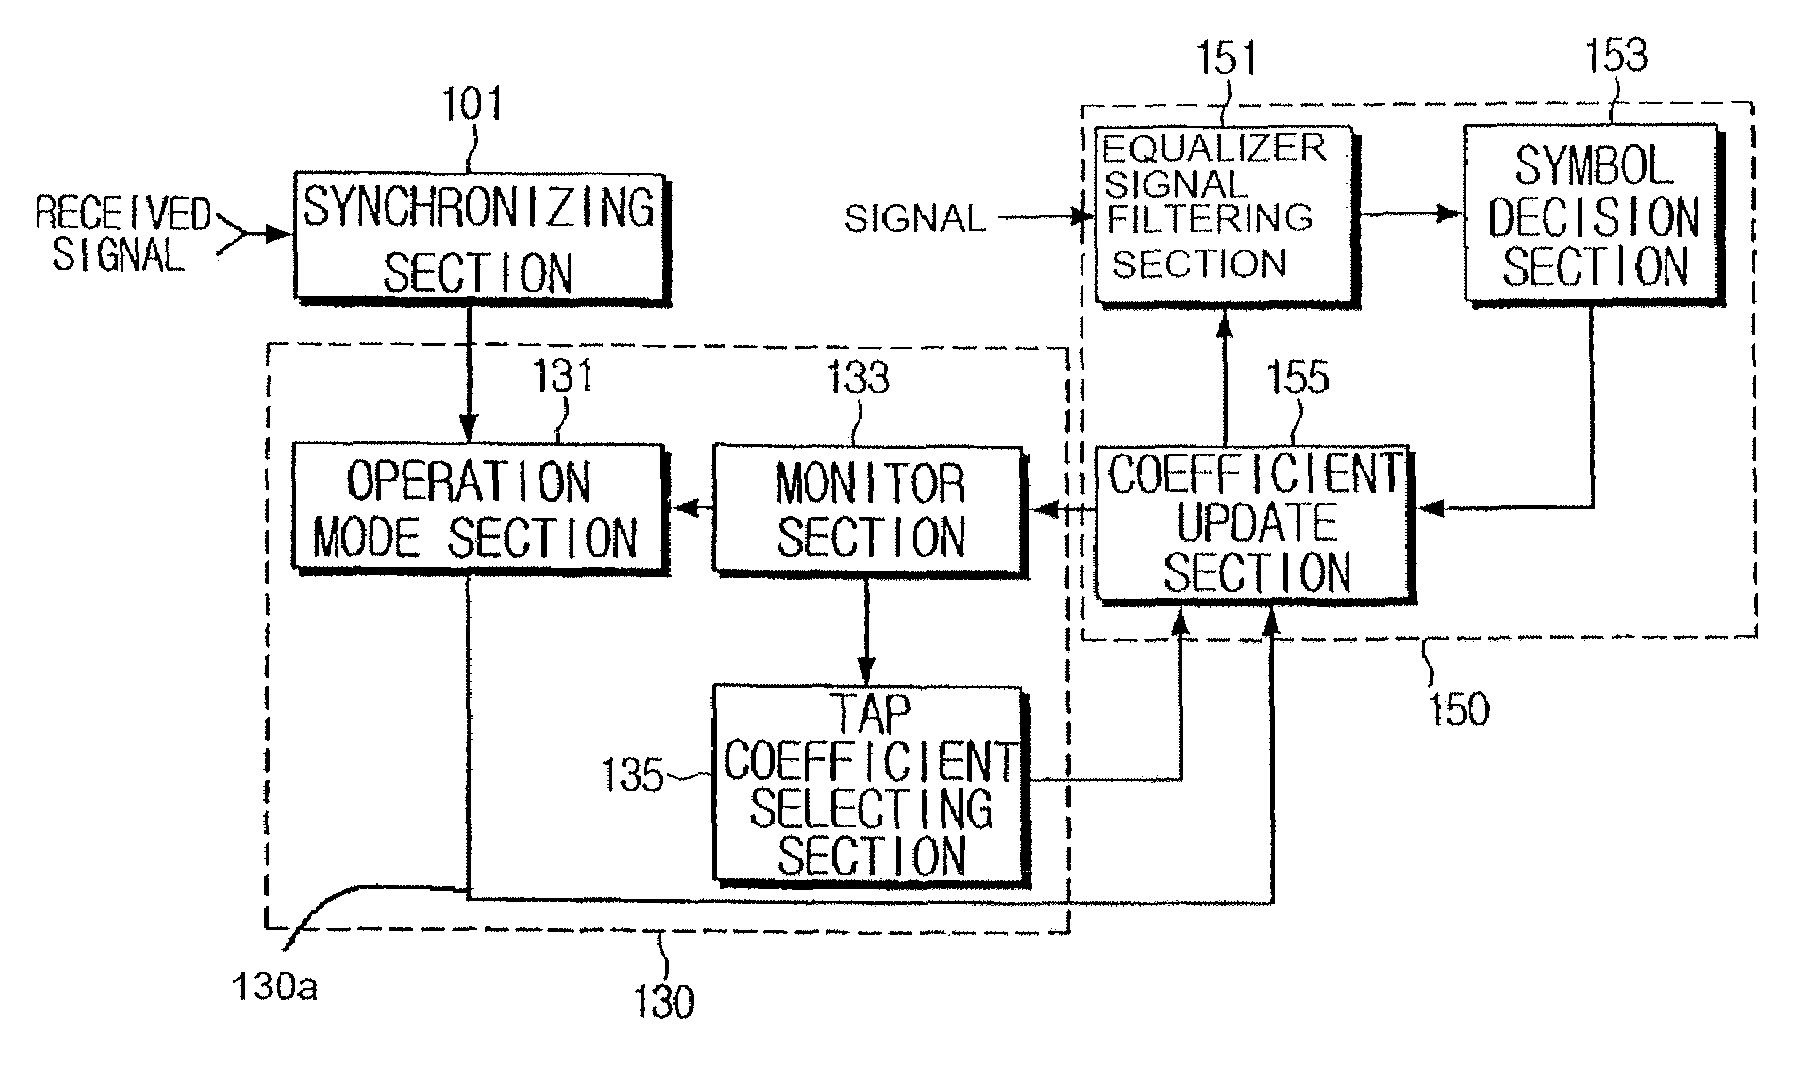 Method and apparatus to control operation of an equalizer